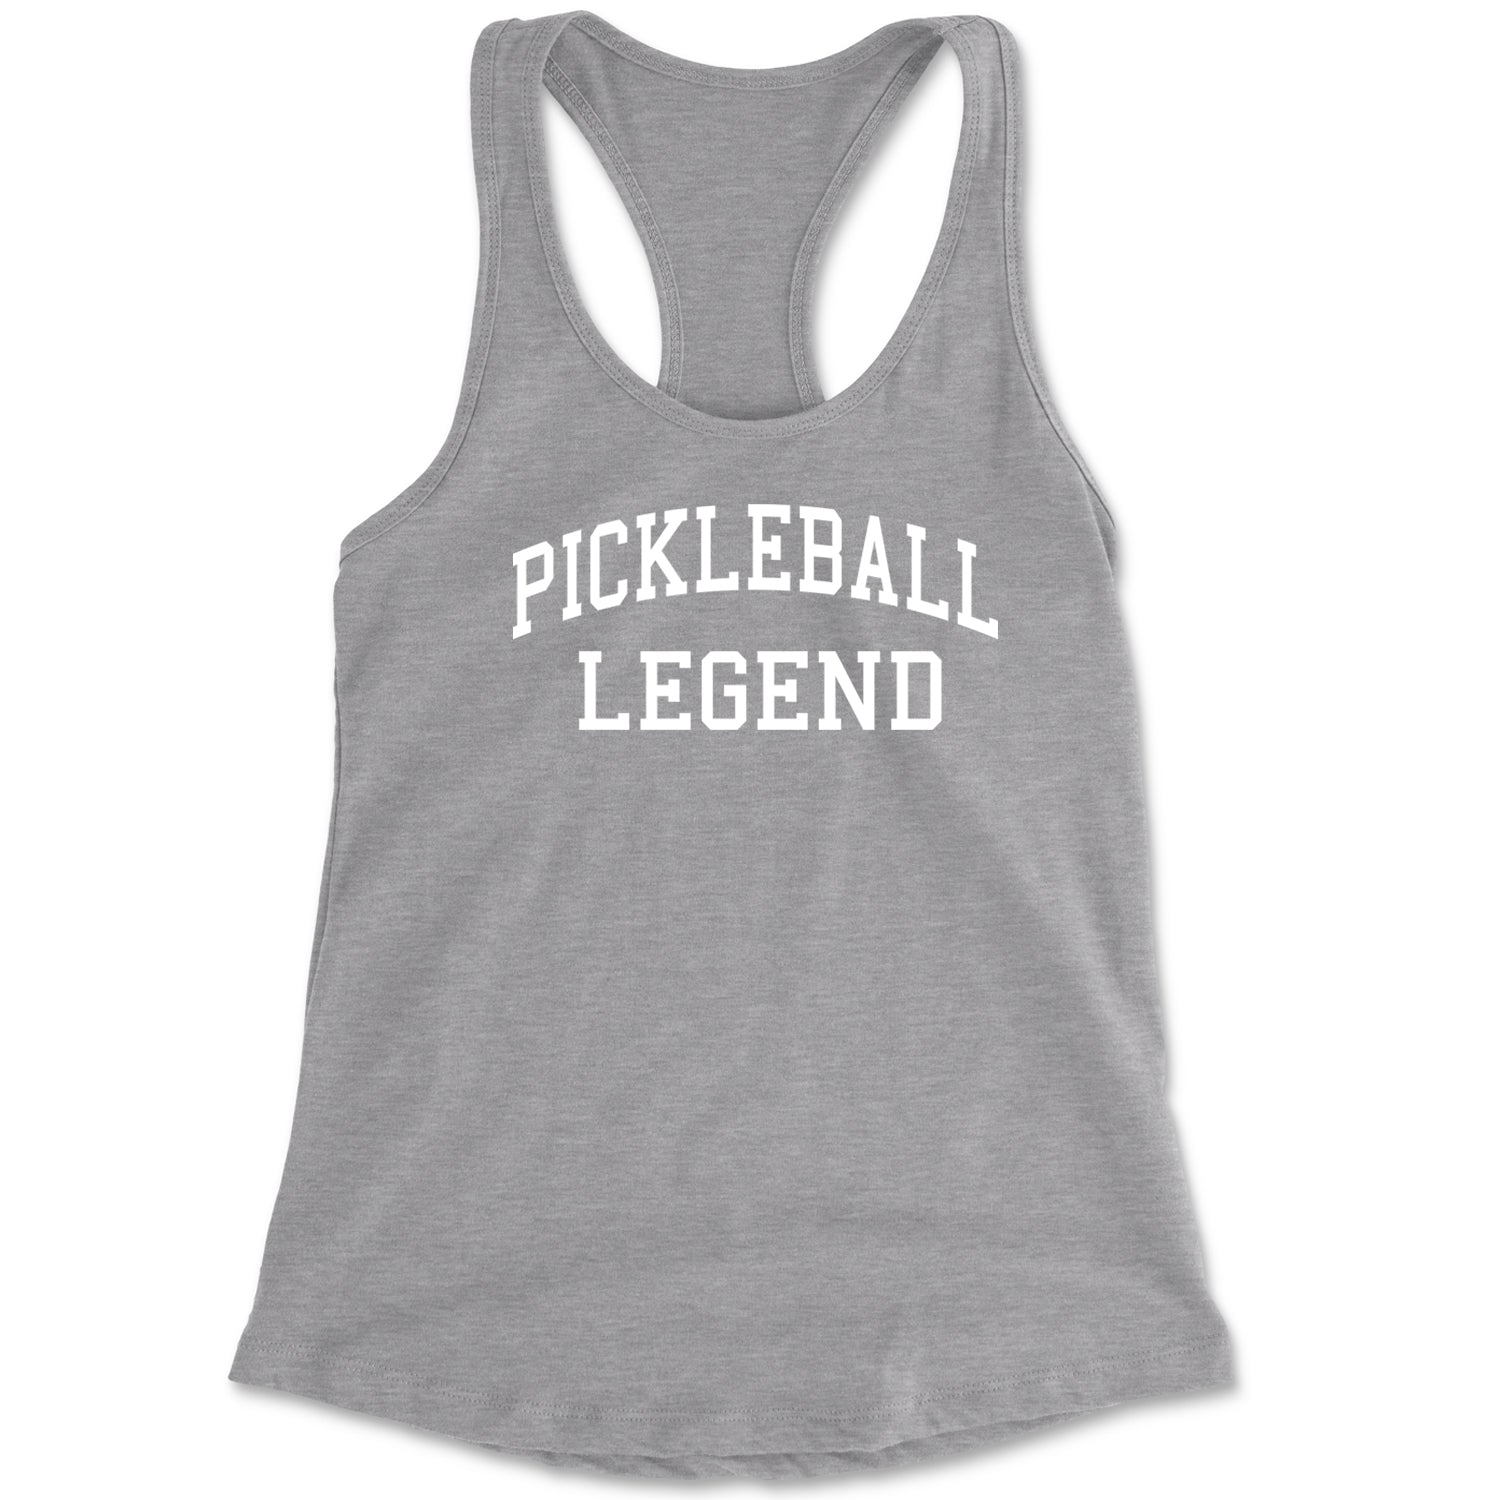 Pickleball Legend Racerback Tank Top for Women ball, dink, dinking, pickle, pickleball by Expression Tees